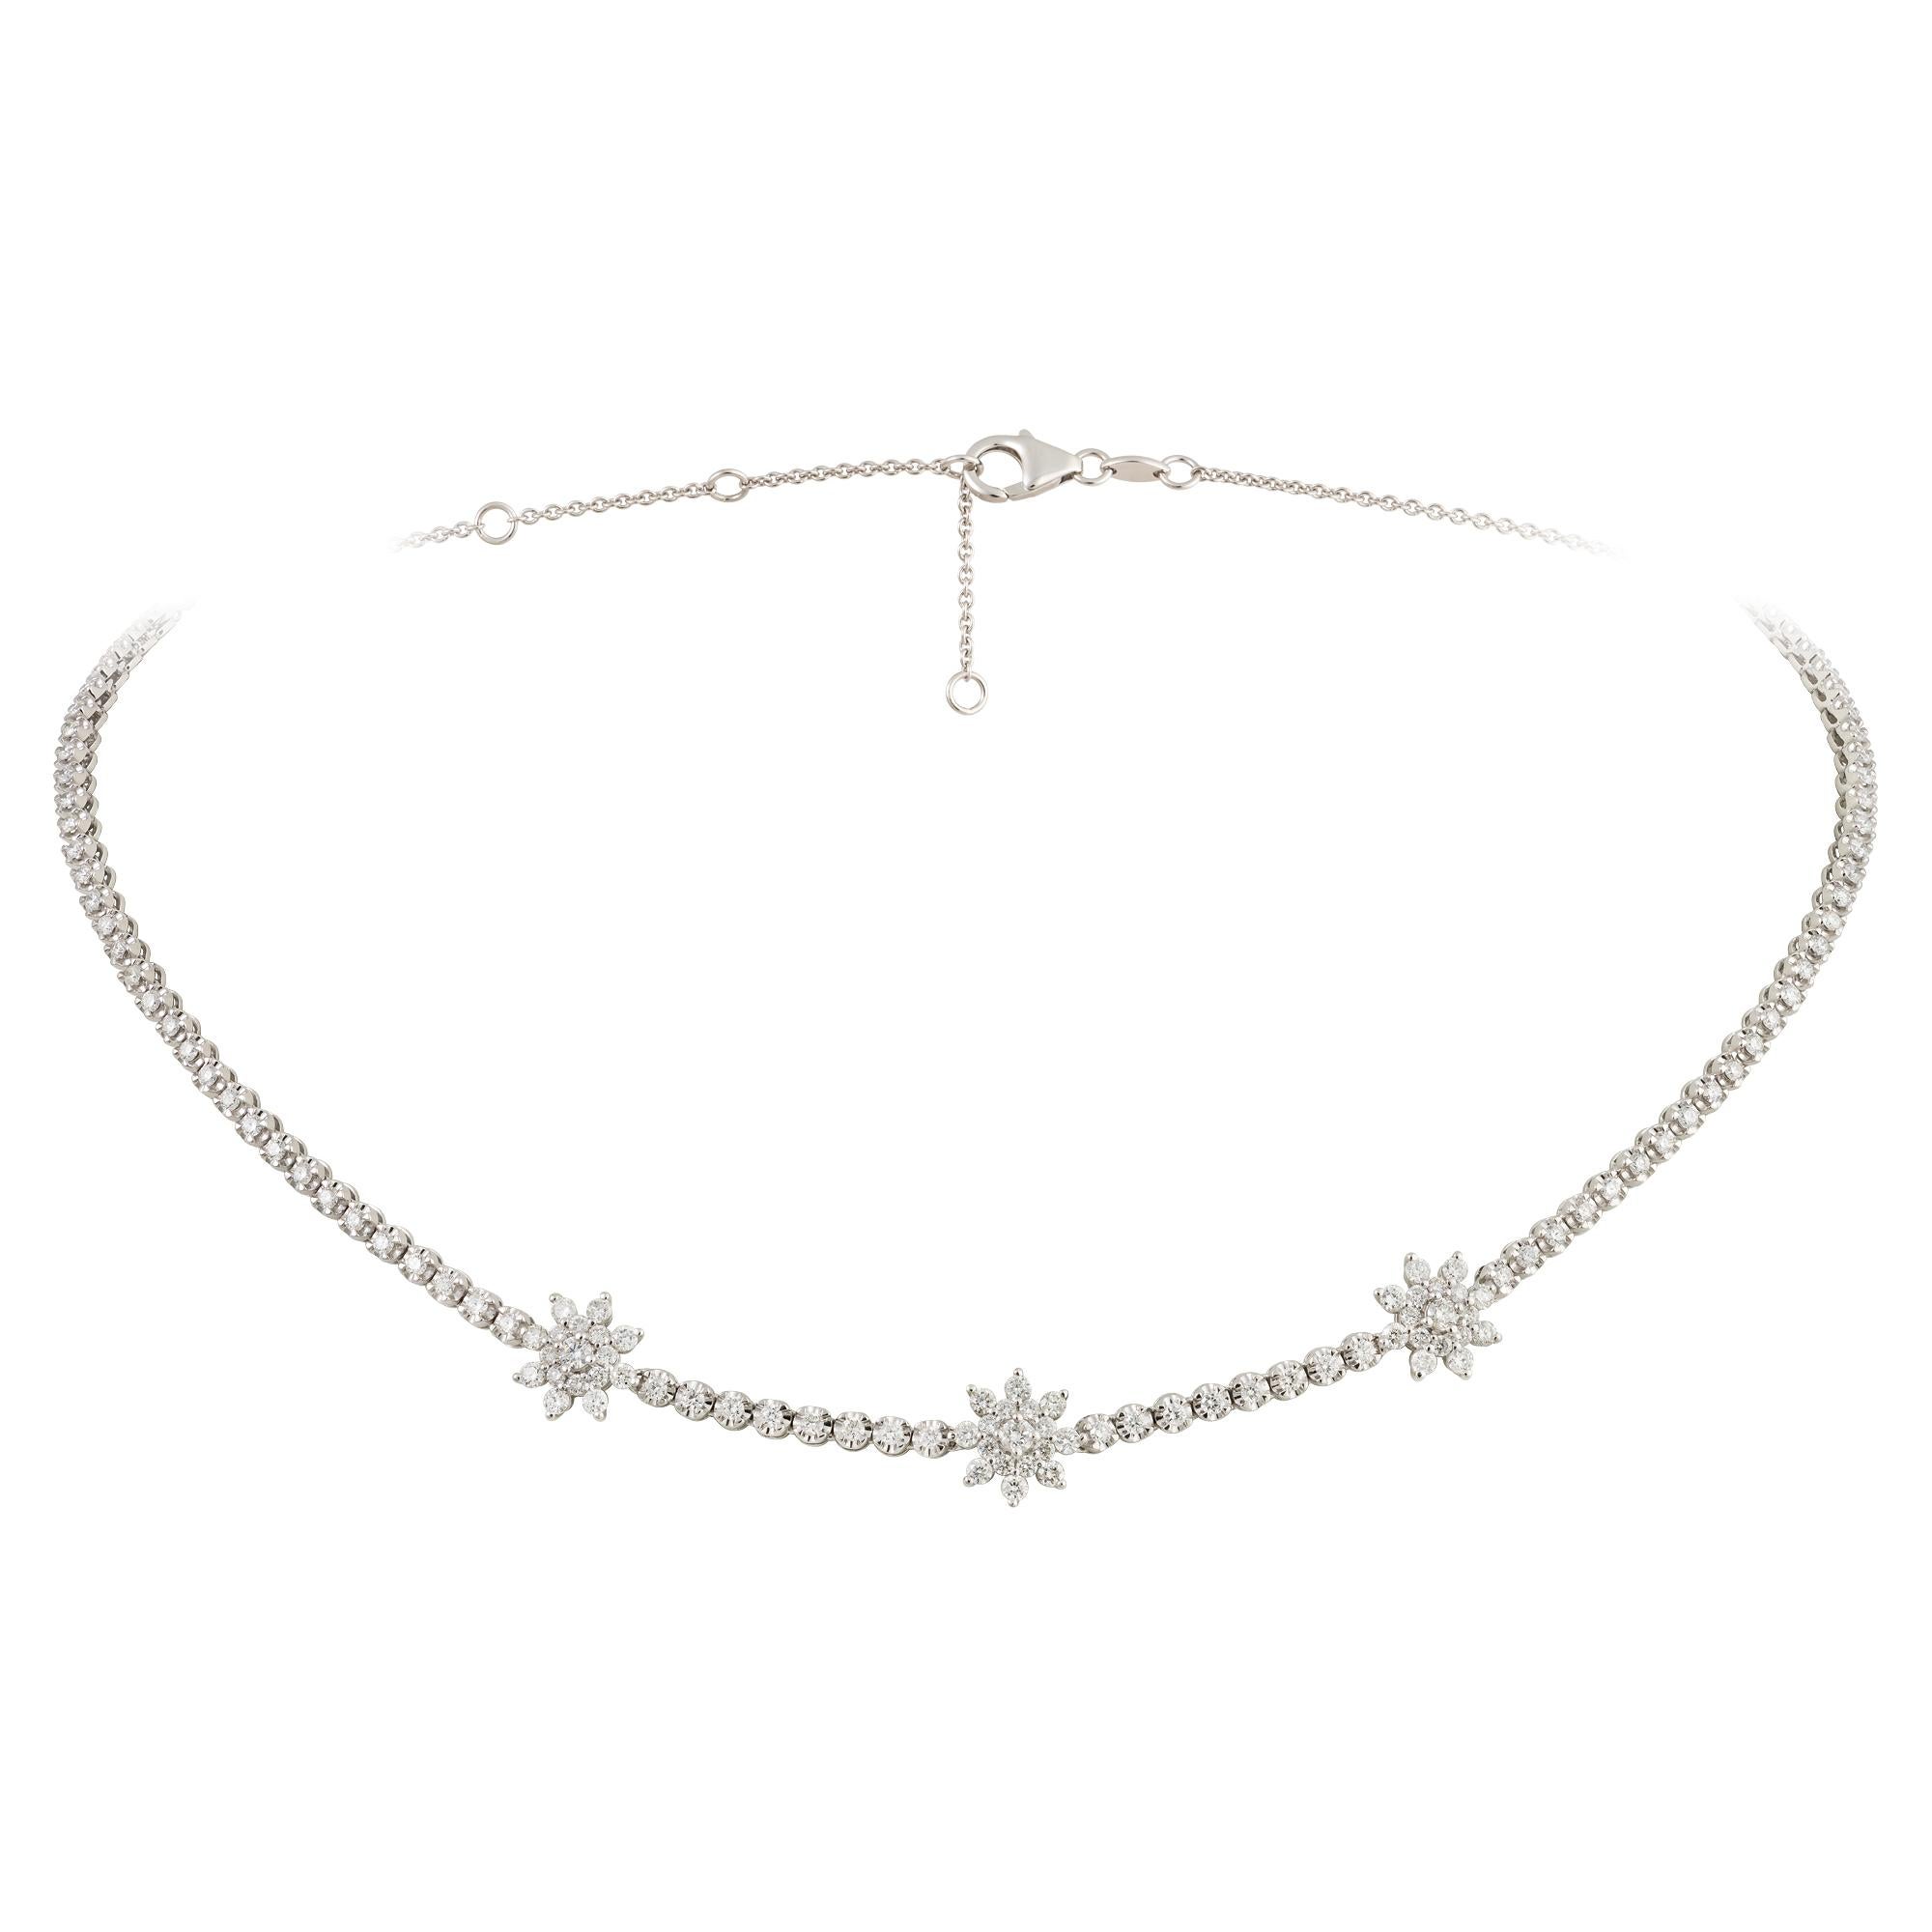 The Following Item we are offering is a Rare 18KT White Gold Triple Flower Diamond Strand Necklace. Necklace is comprised of Finely Set Gorgeous Glittering Diamond in a strand and 3 Large Cluster of Flowers.!! T.C.W. Approx 2.25CTS!! This Gorgeous